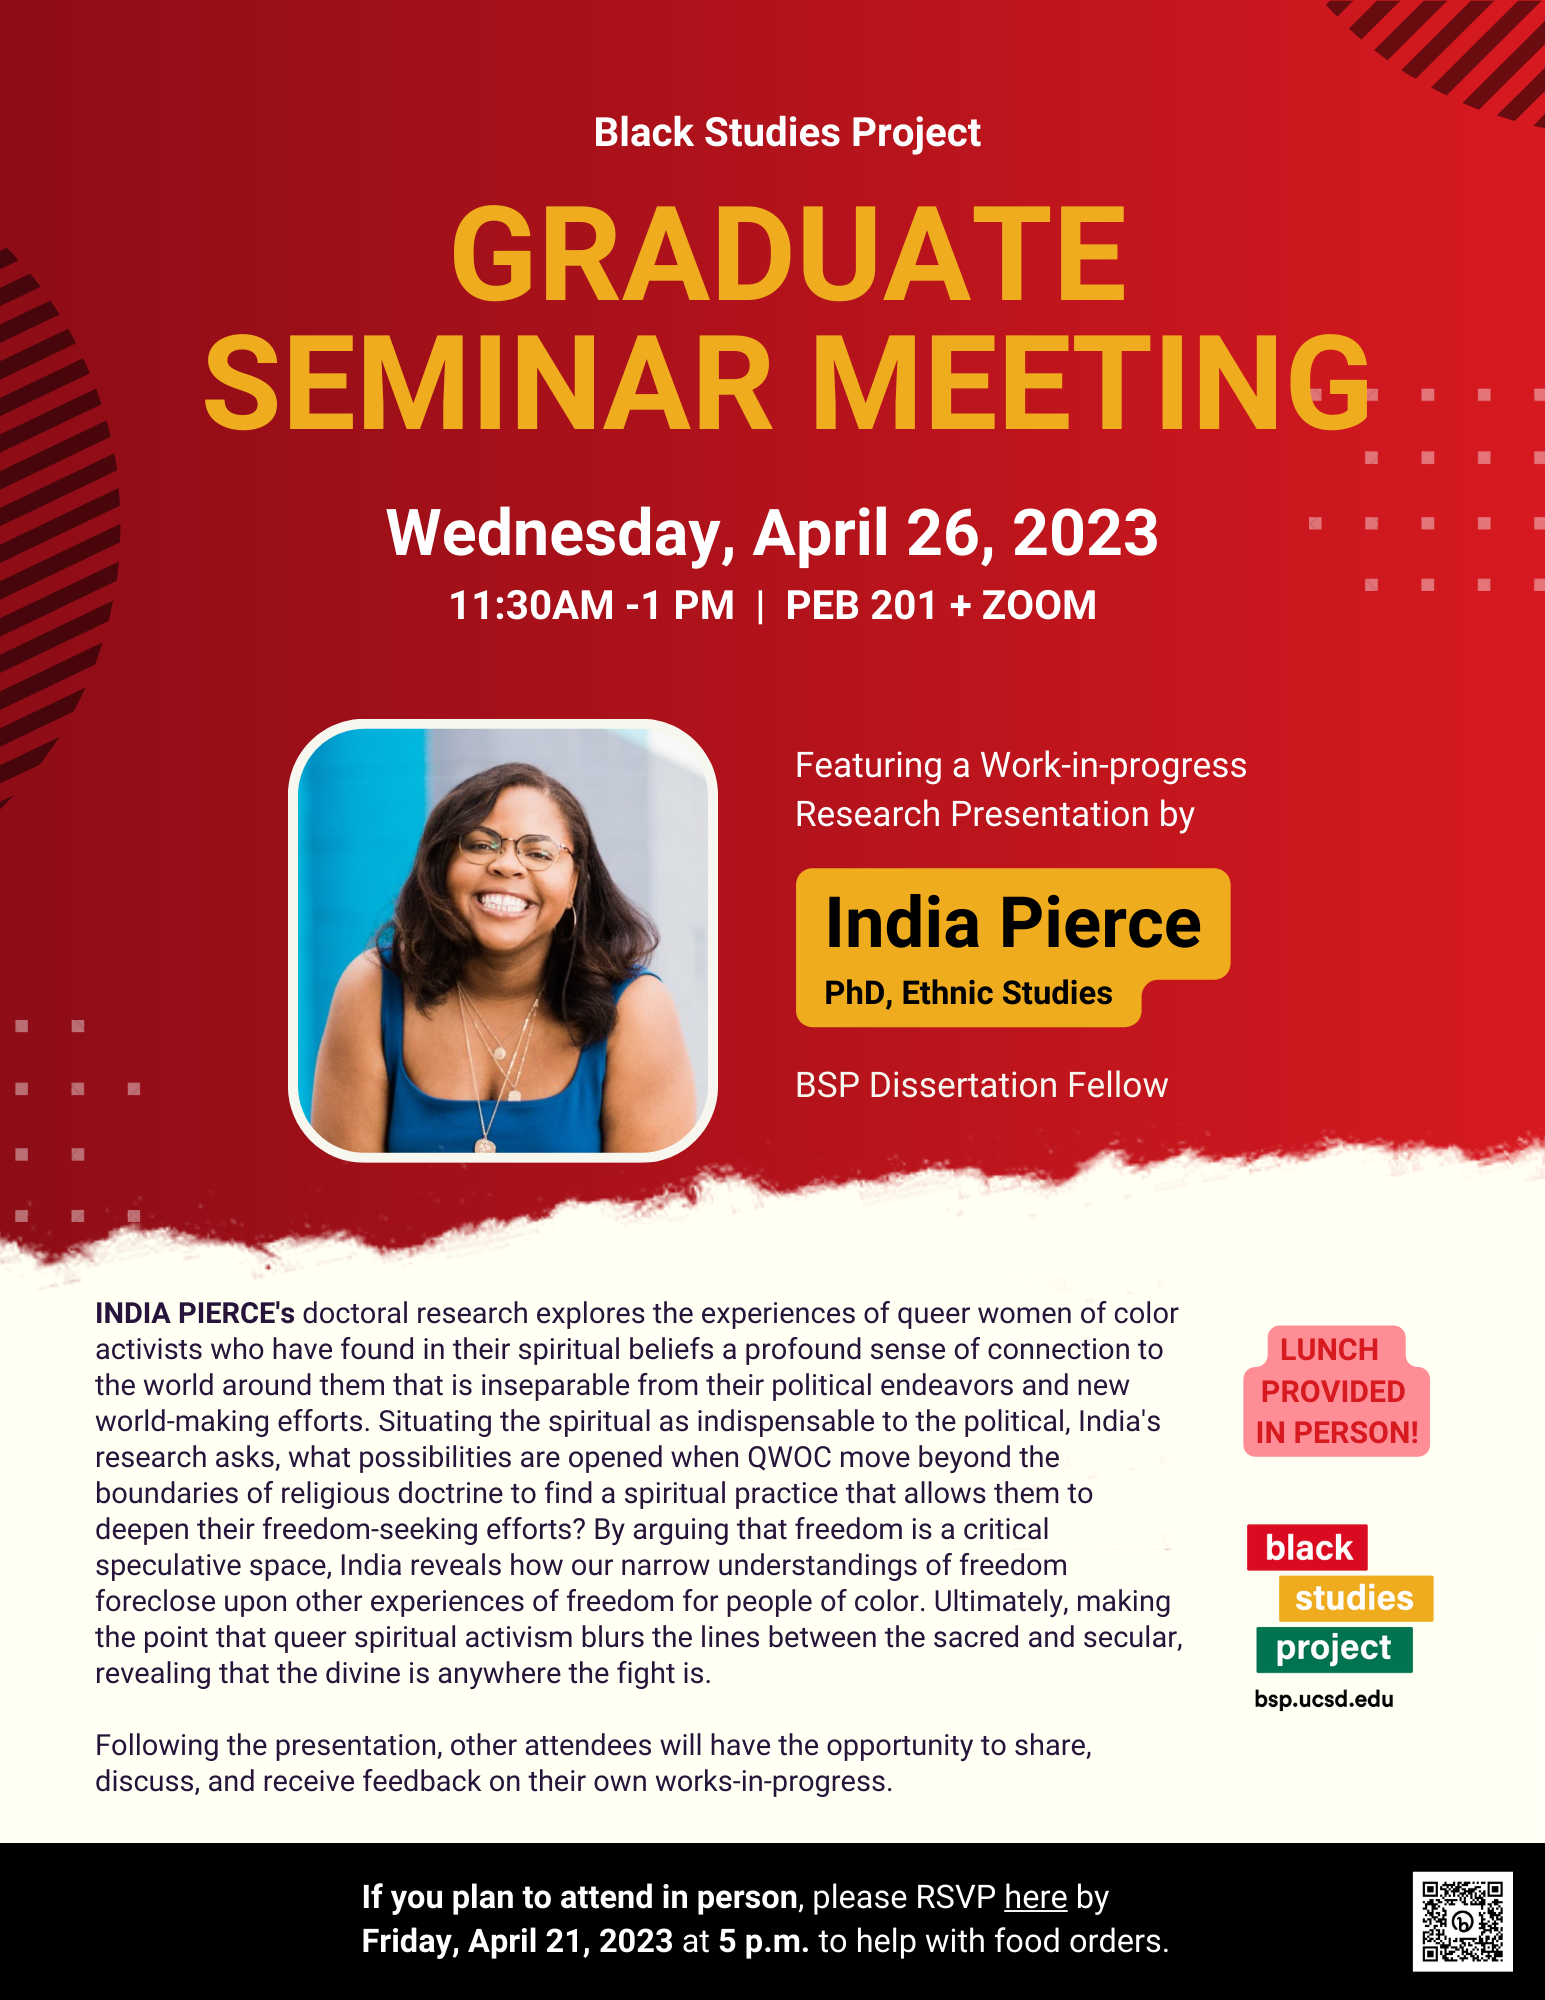 Flier bearing India Pierce's image and text describing the presentation topic, with a text sign on top of the content declaring the event is postponed